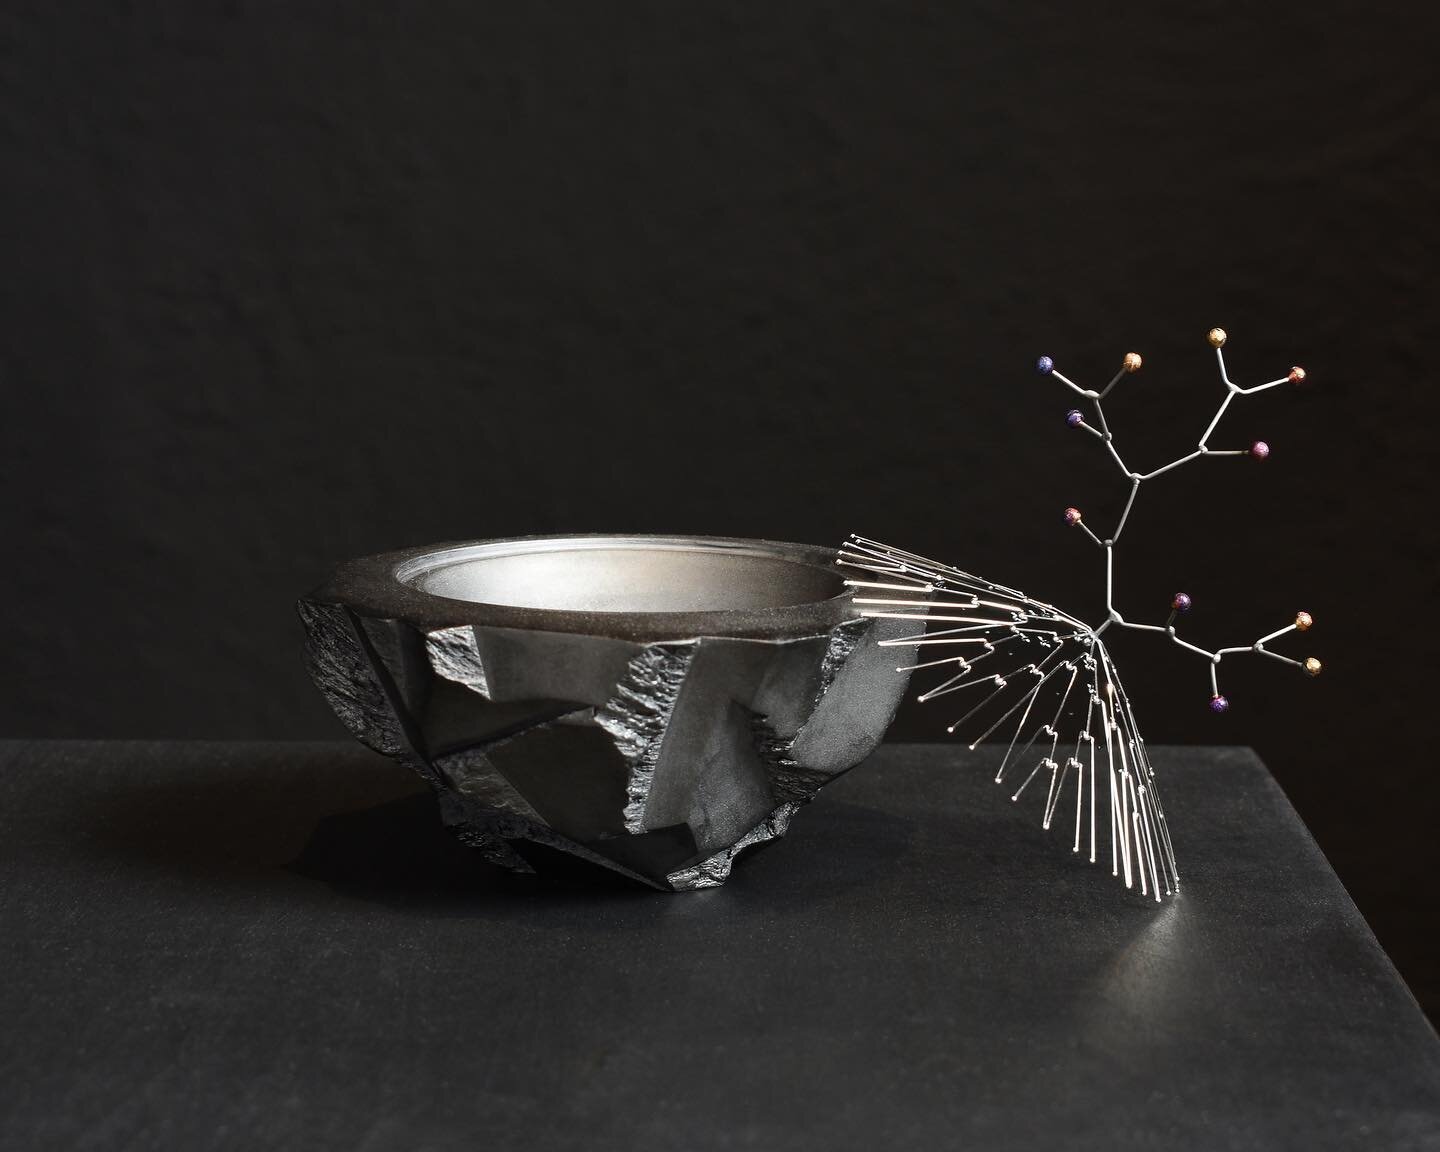 Sheltered Bowl, Winter.  A tiny sculptural vessel. 

  The top portion is comprised of many strands of fine stainless steel, meticulously welded and then highly polished. The finial spheres have a coloration achieved during the welding process by lim